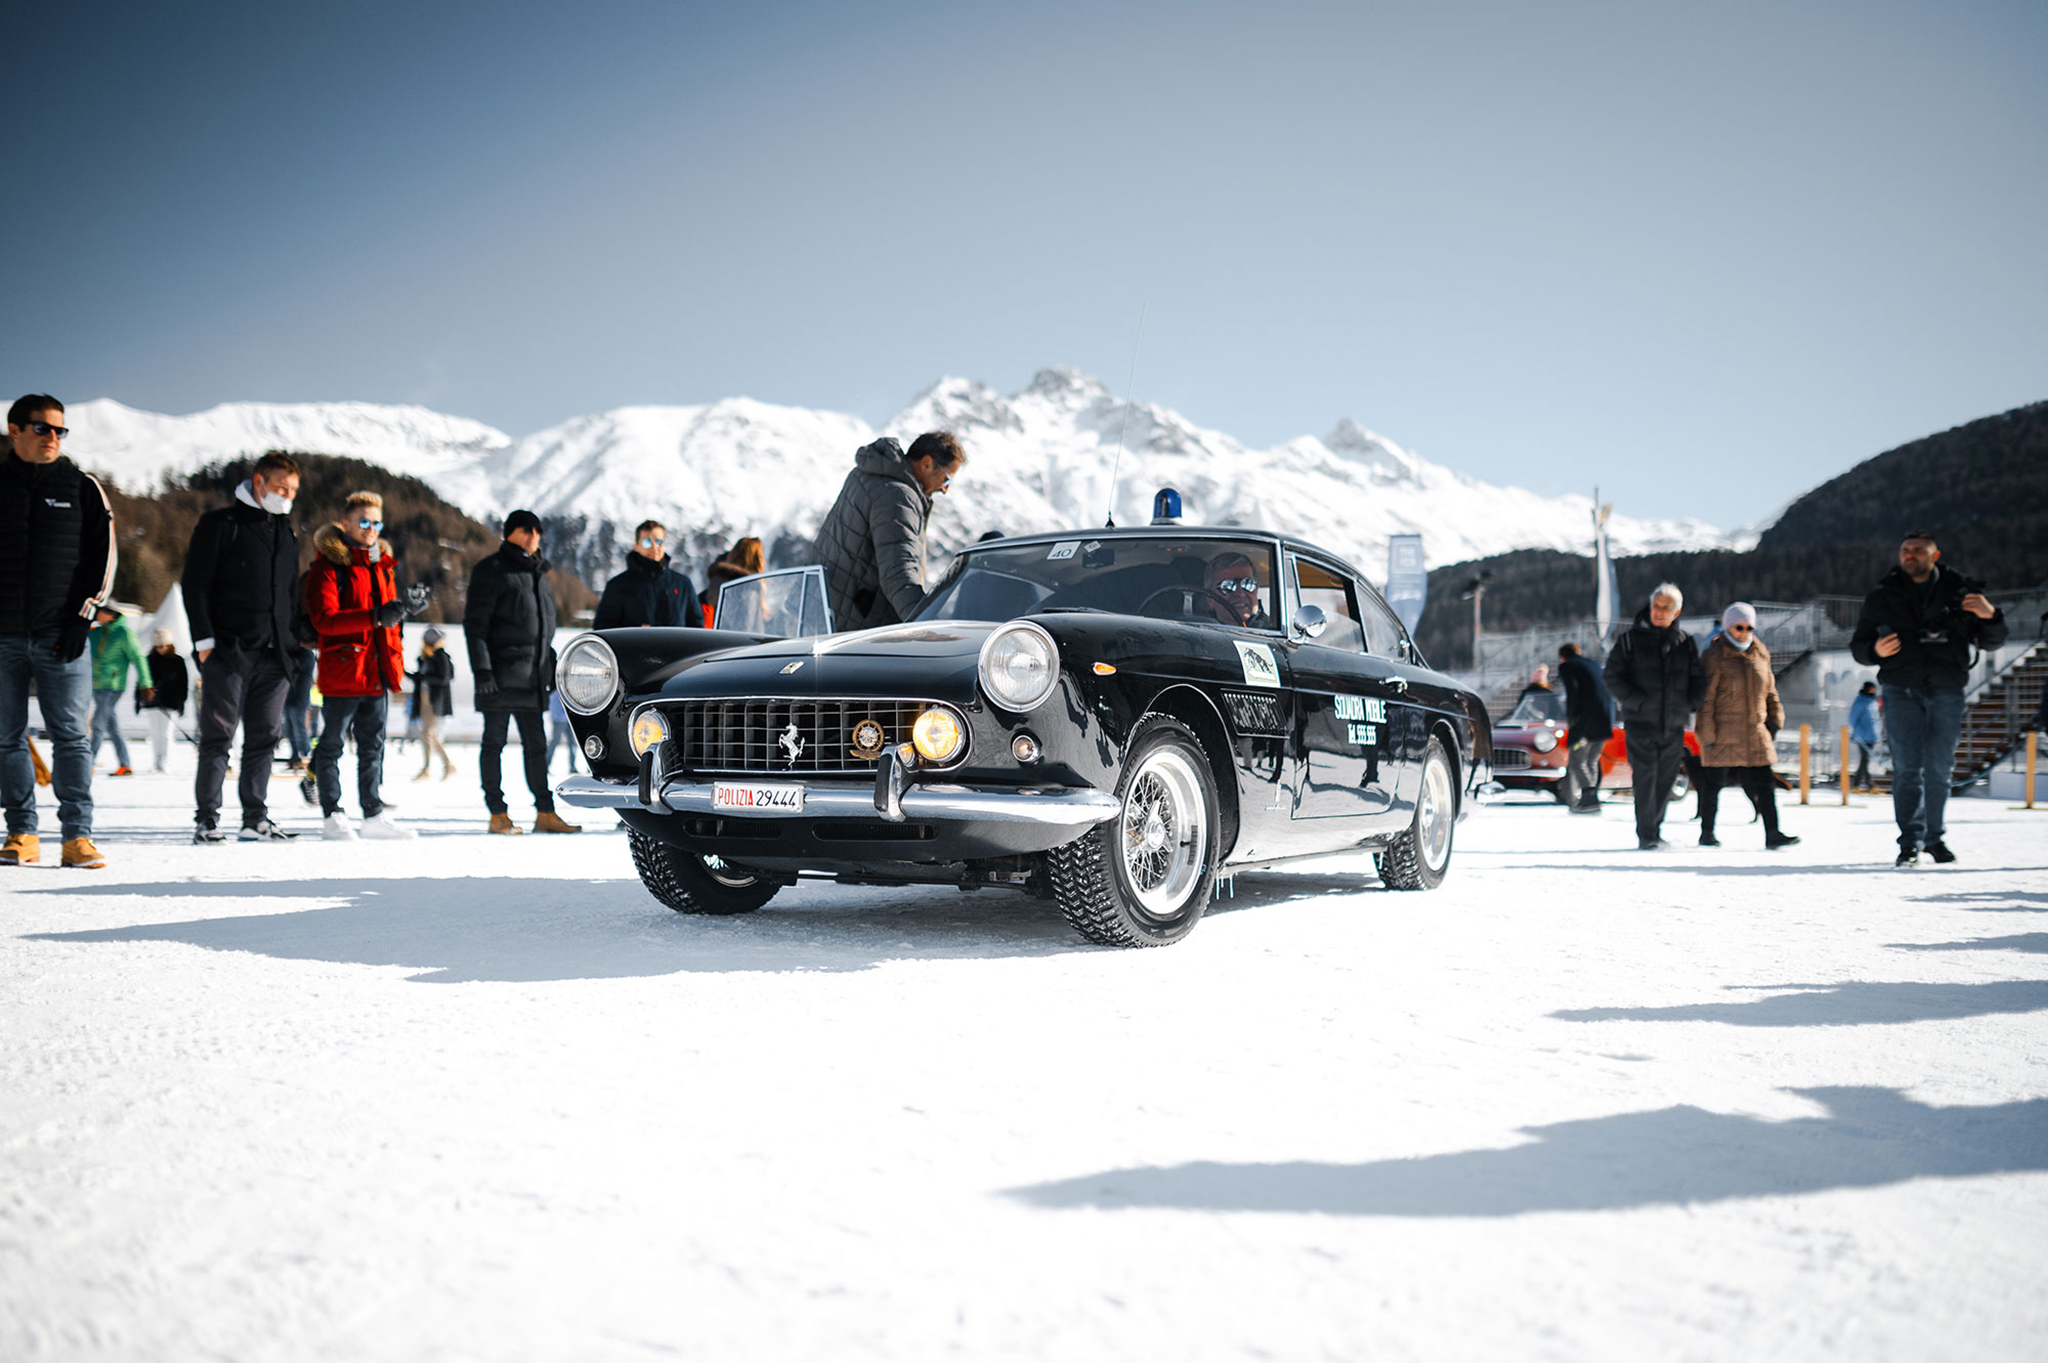 A 3/4 front view of a black Ferrari 250 GT Berlinetta parked on the frozen lake of St. Moritz with people and mountains in the background.